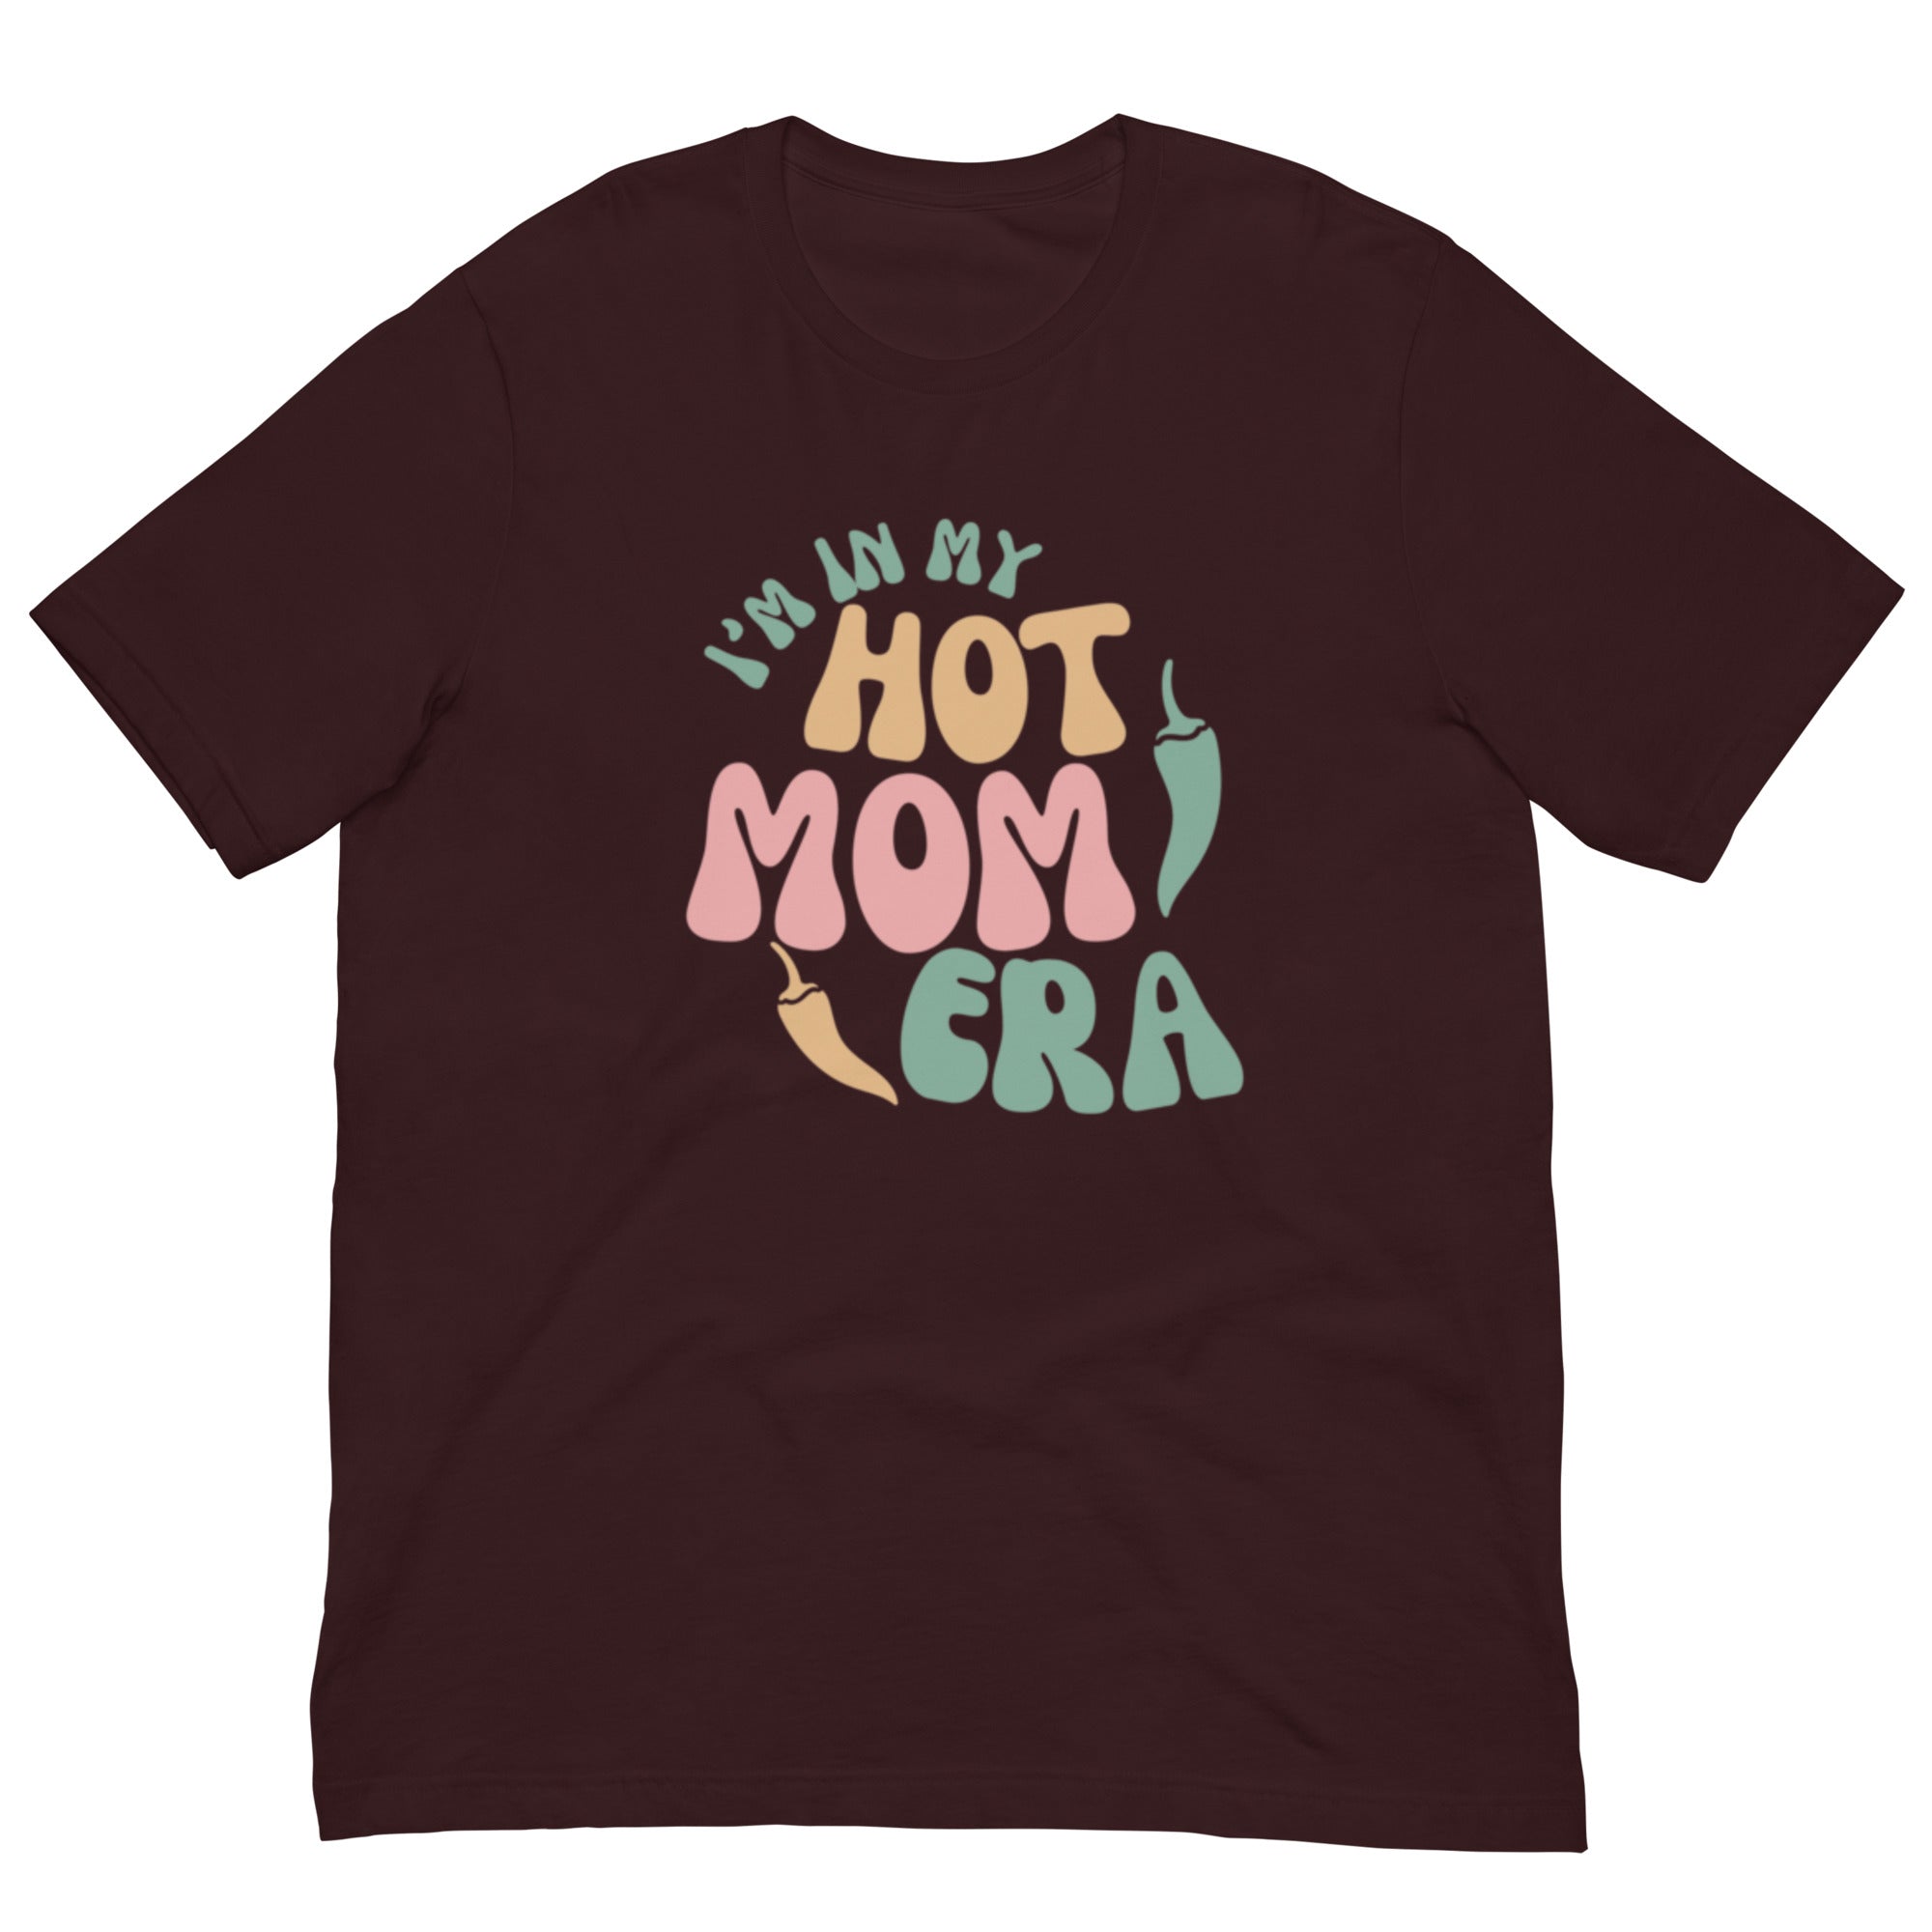 A dark brown, breathable Era Shirt with the phrase "i'm in my hot mom era" printed in stylized, colorful letters on the front.